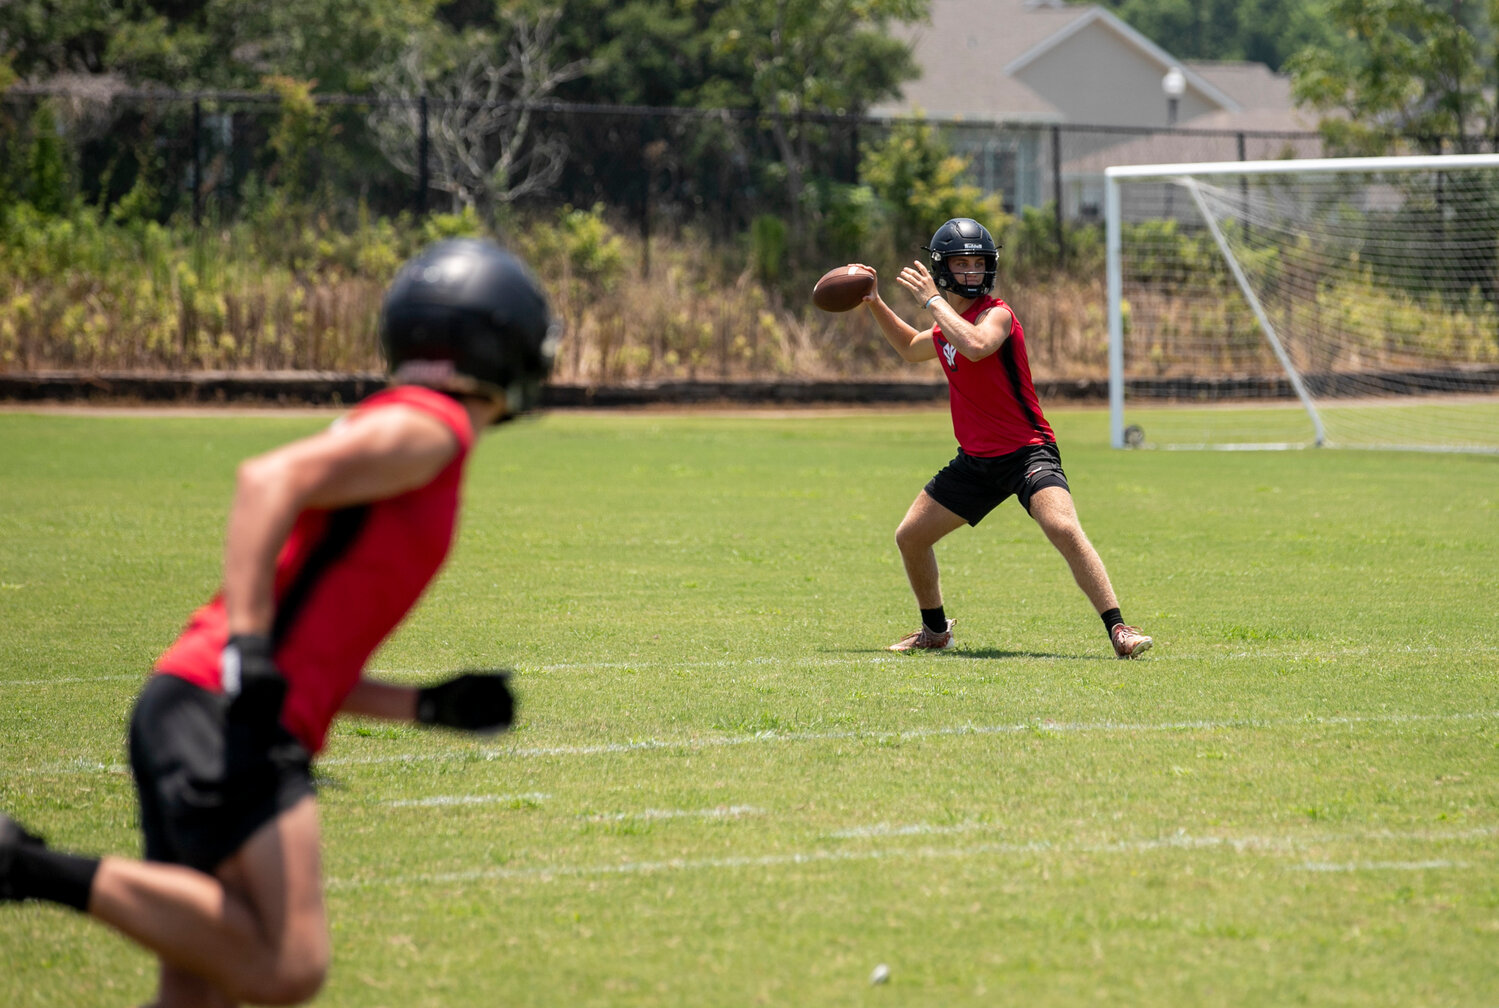 Spanish Fort’s Drew Williamson loads up a throw in the first round of bracket play at the Foley 7-on-7 Showdown on Thursday, June 29. The Toros took down the Lions’ B Team by a score of 35-15.